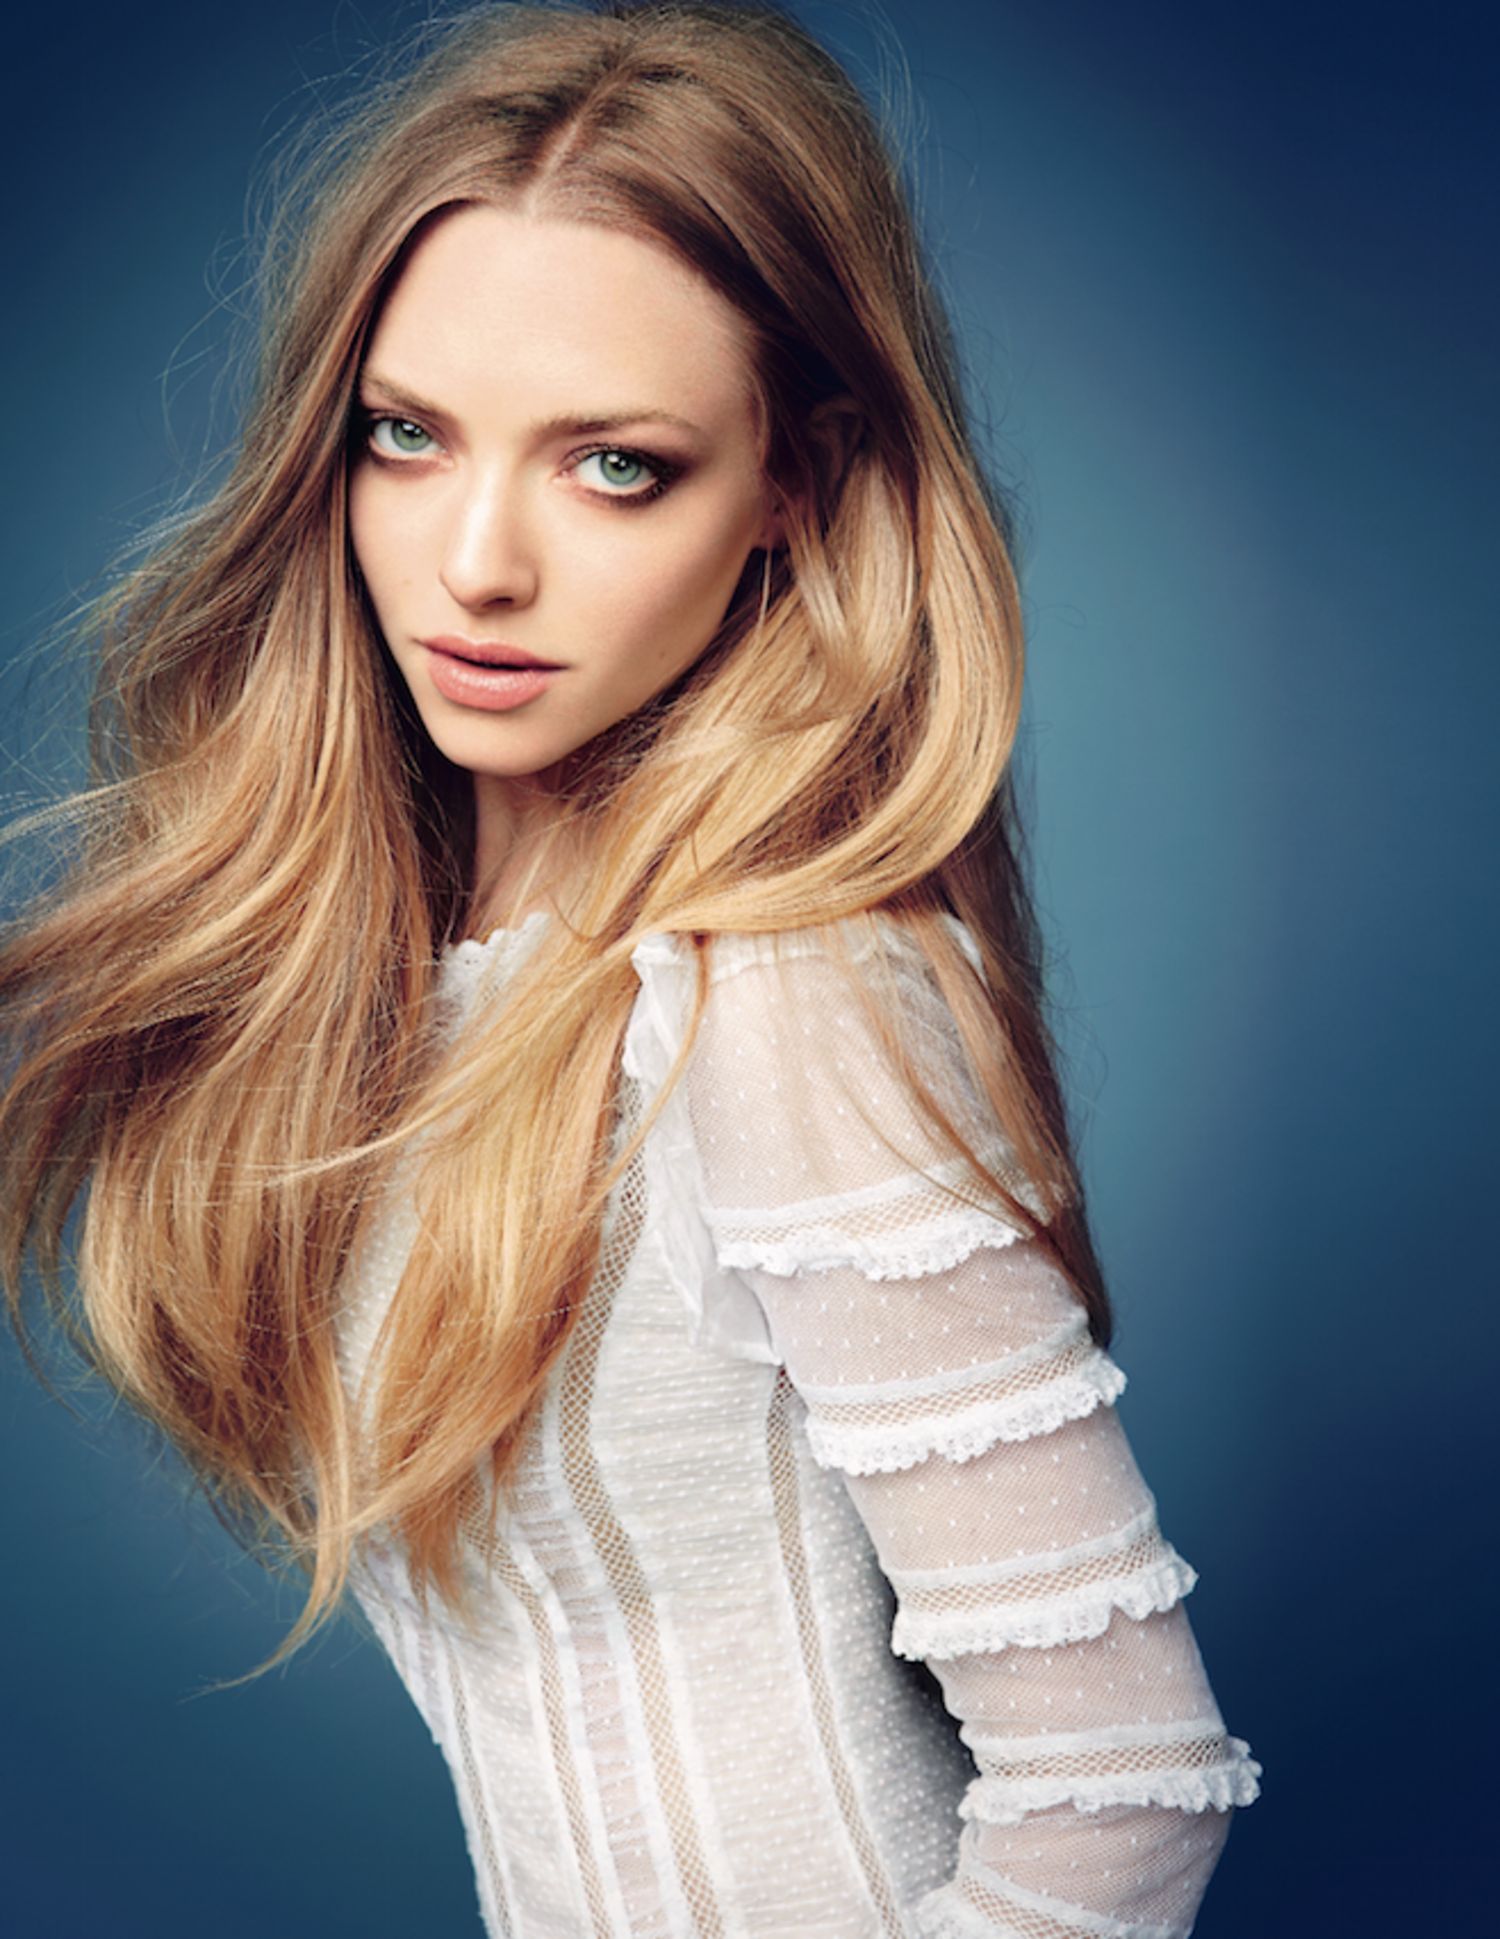 AMANDA SEYFRIED’S SKINCARE ROUTINE: HOW SHE TAKES CARE OF HER SKIN